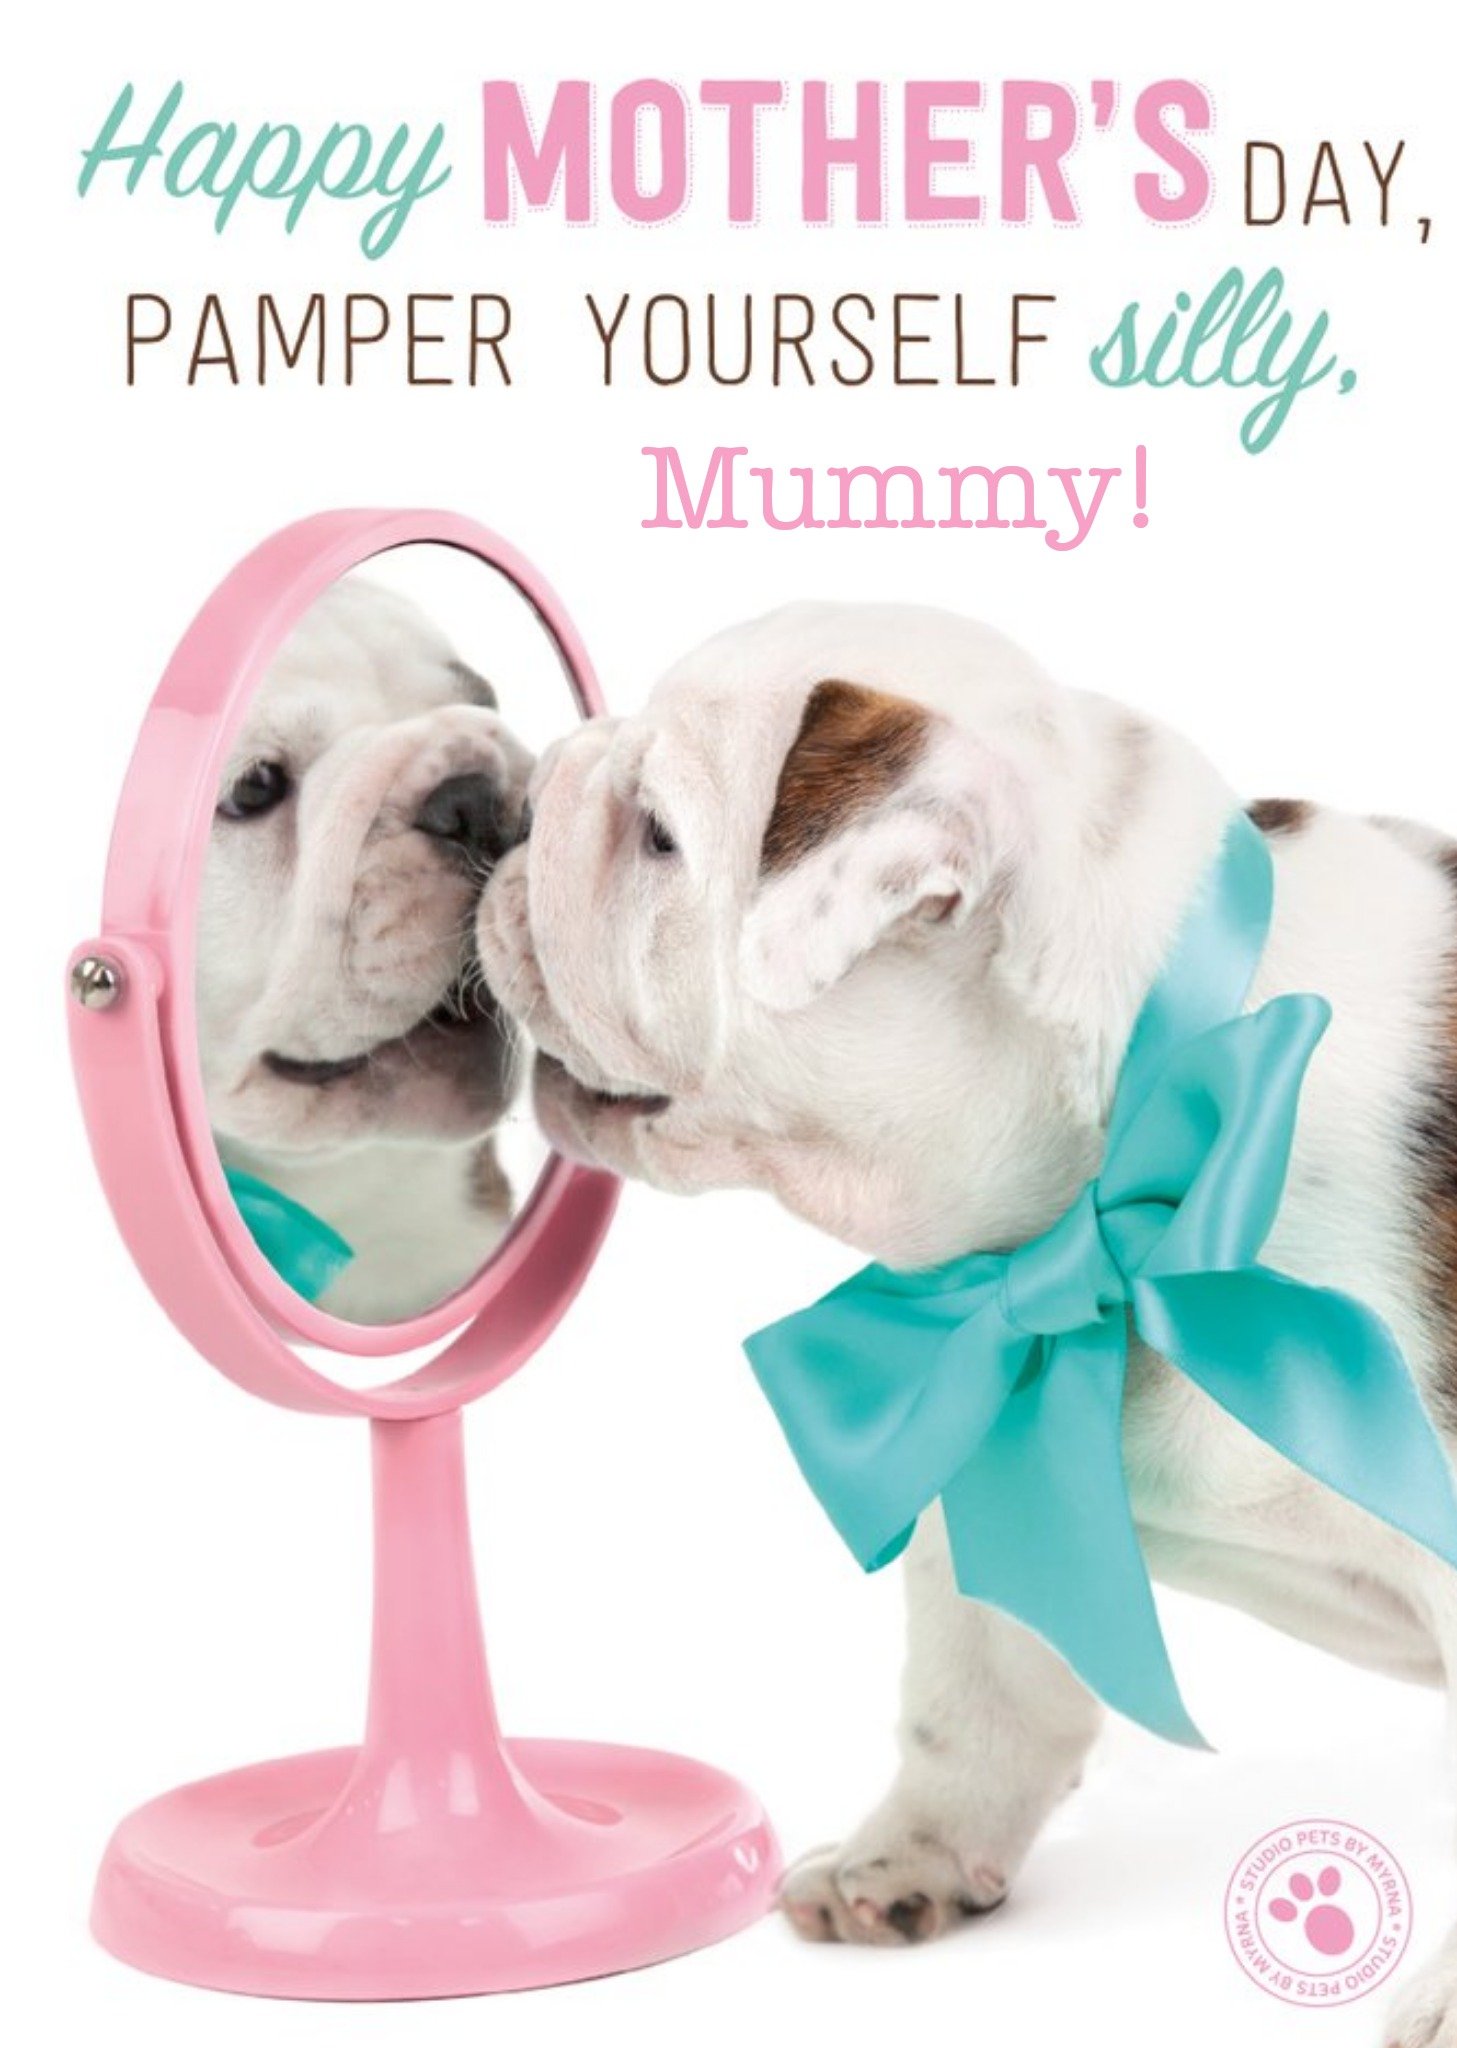 Studio Pets Pamper Yourself Mummy Happy Mothers Day Card Ecard